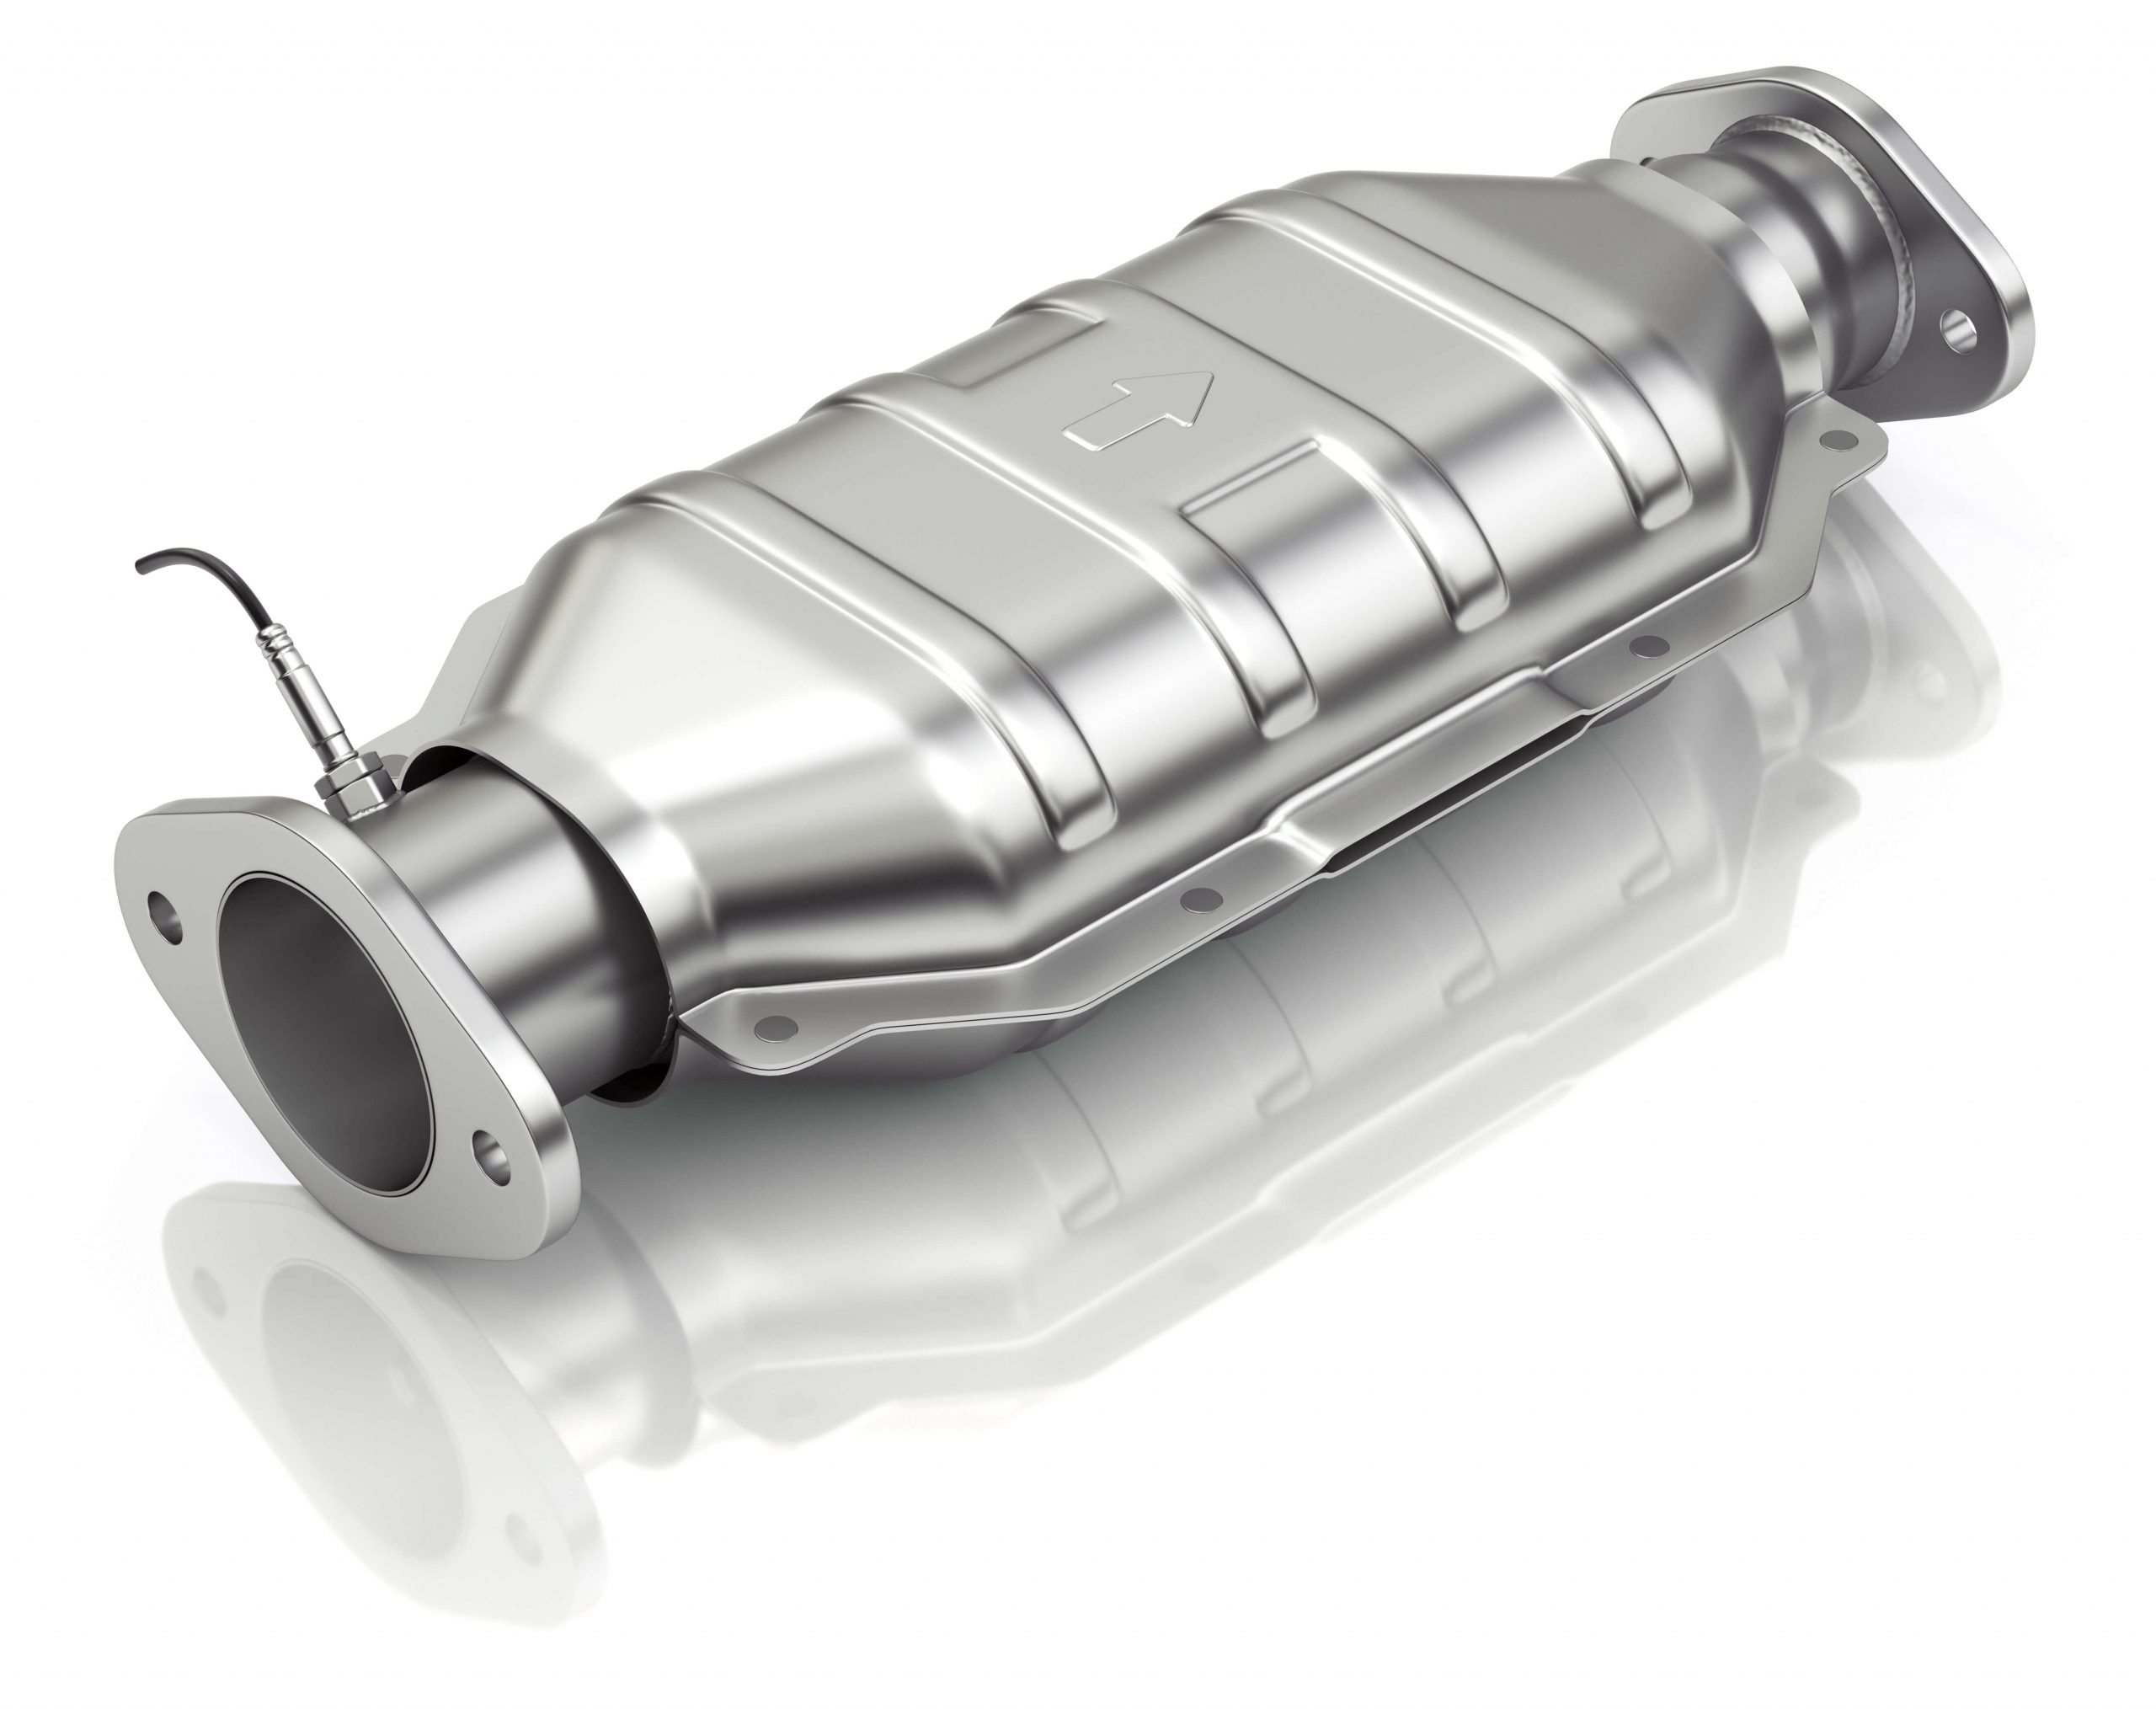 Catalytic Converter Thefts on the Rise in California